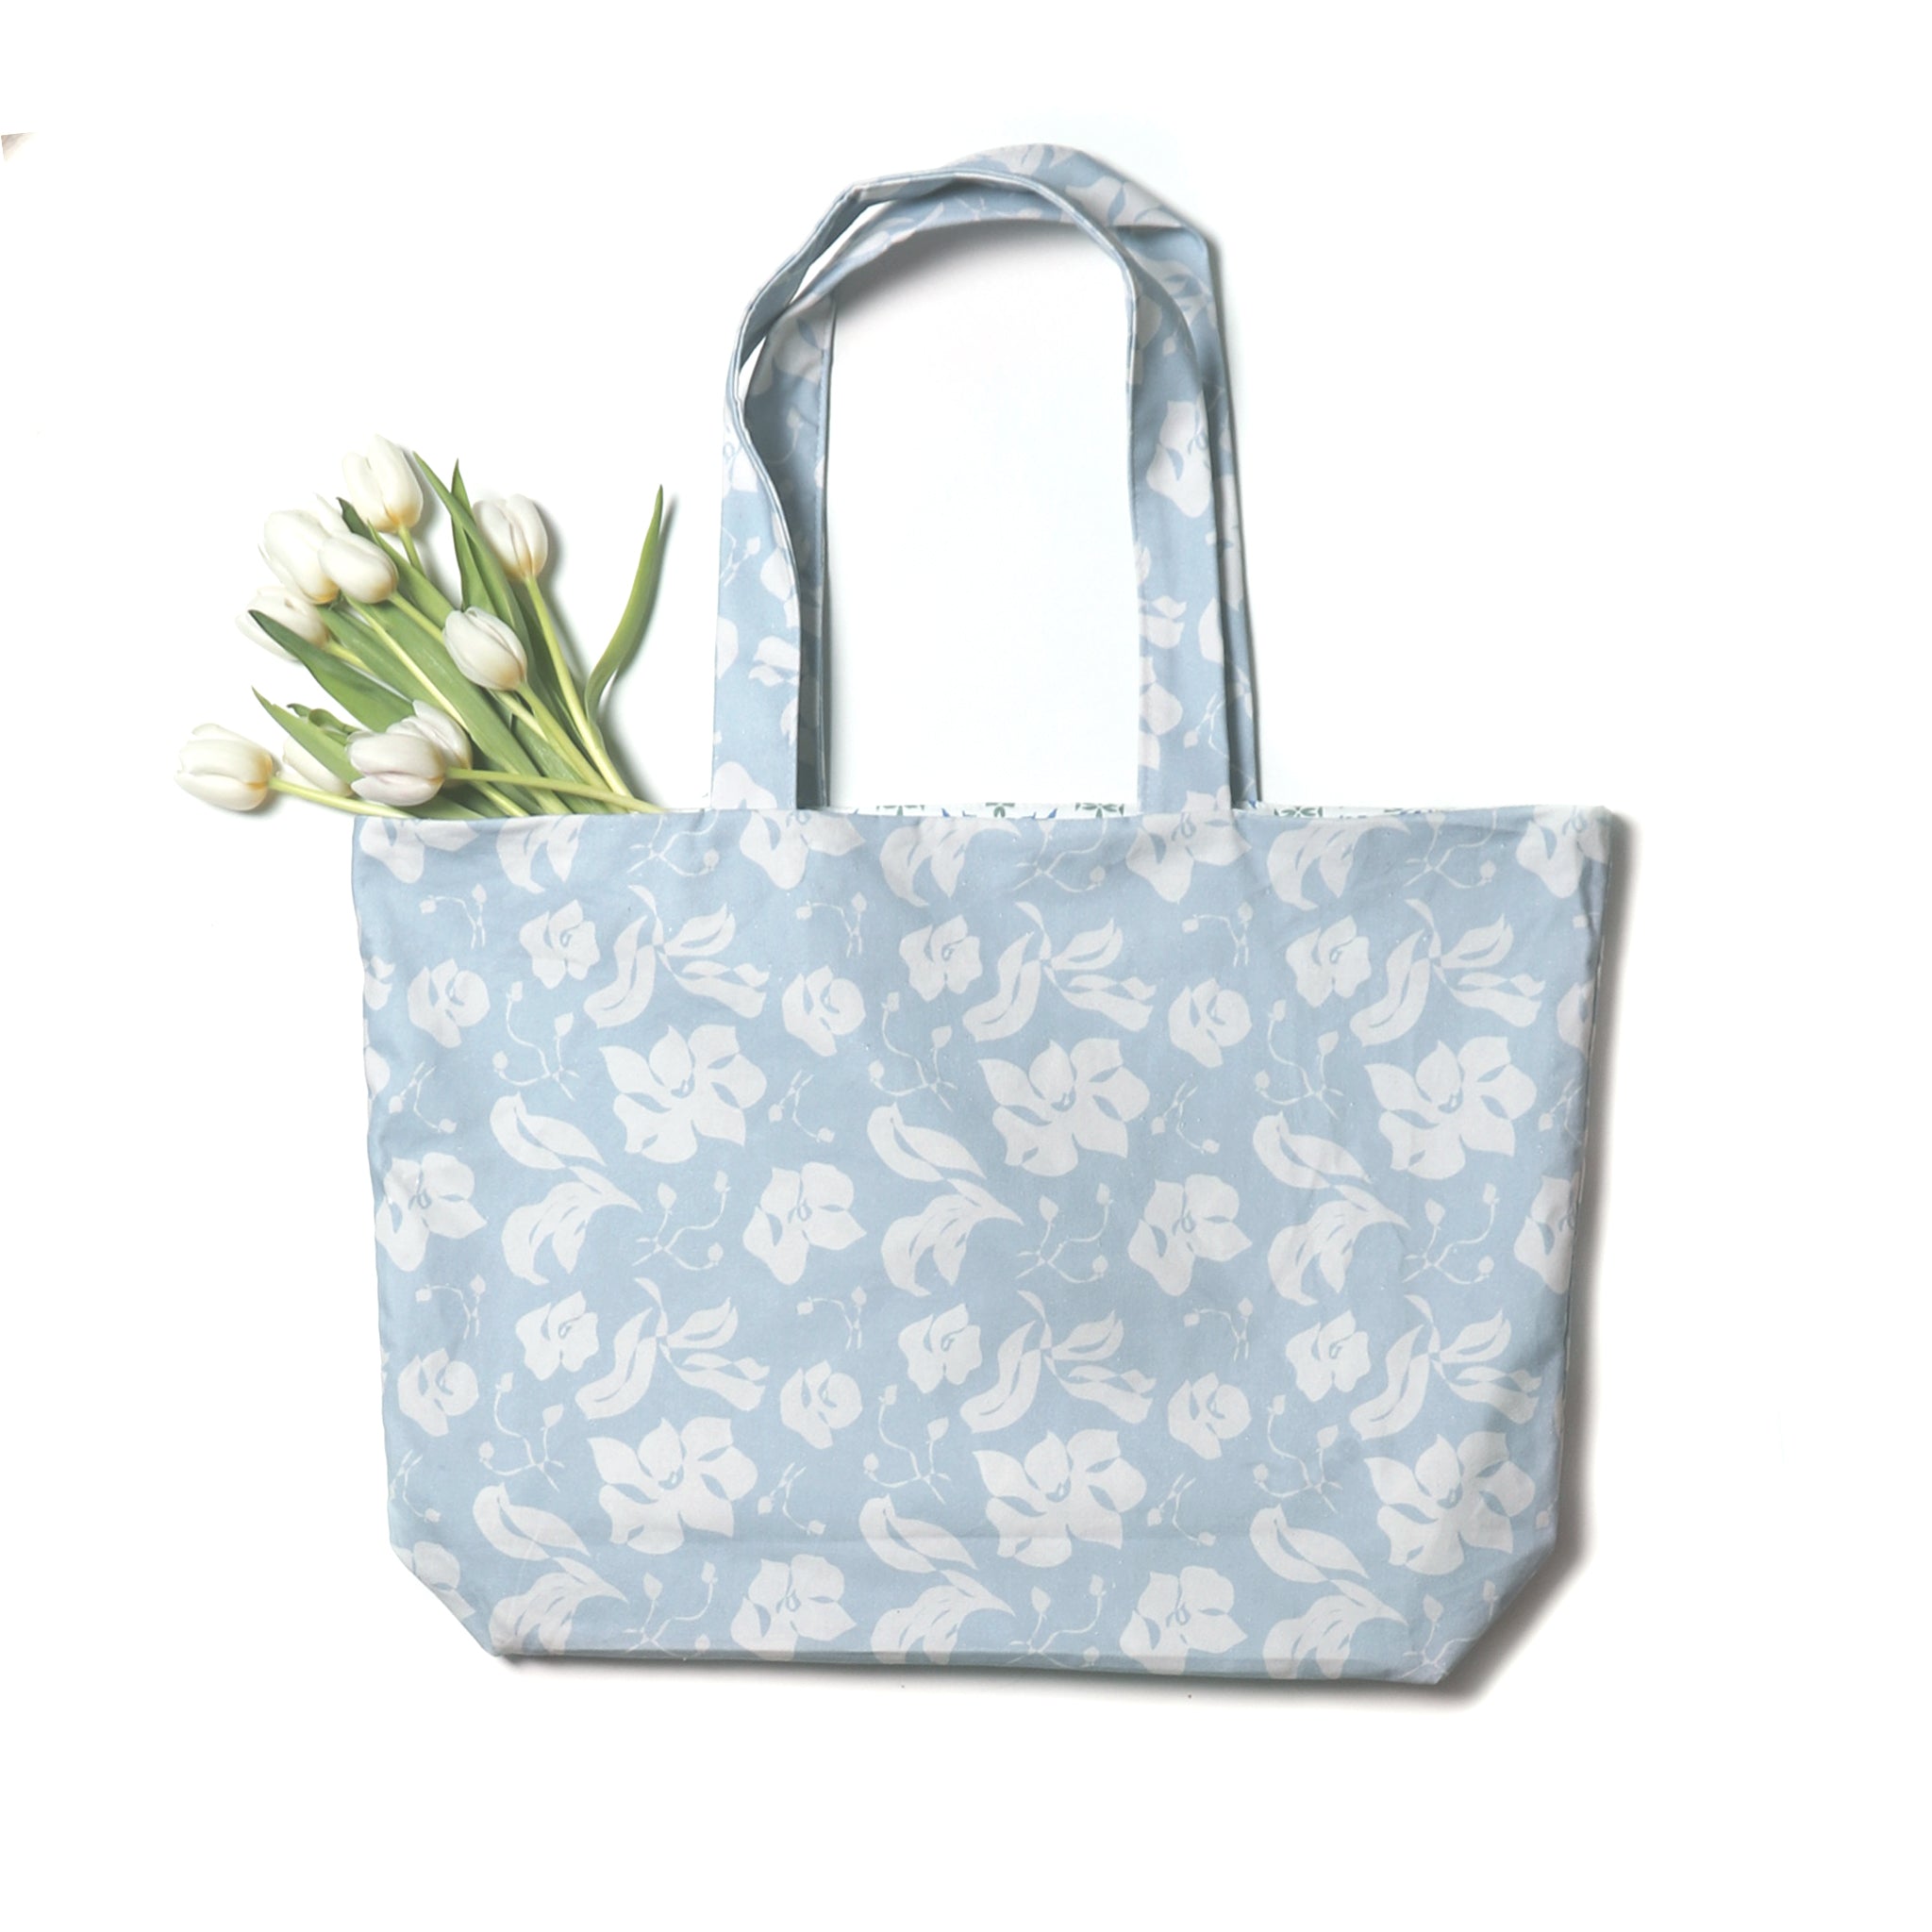 Cornflower Blue Floral Printed Bag with White Tulips inside